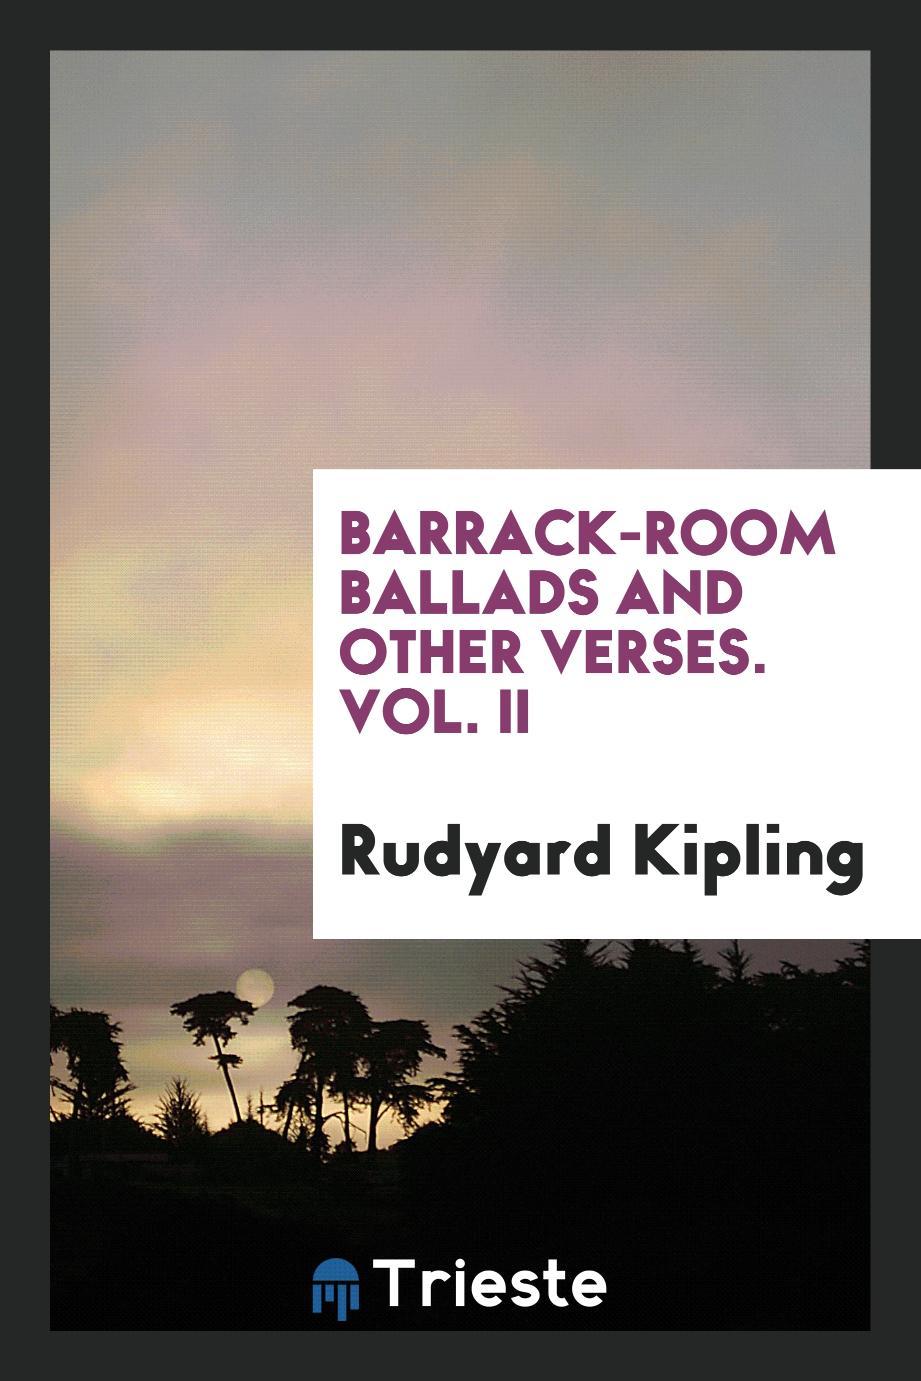 Barrack-room ballads and other verses. Vol. II